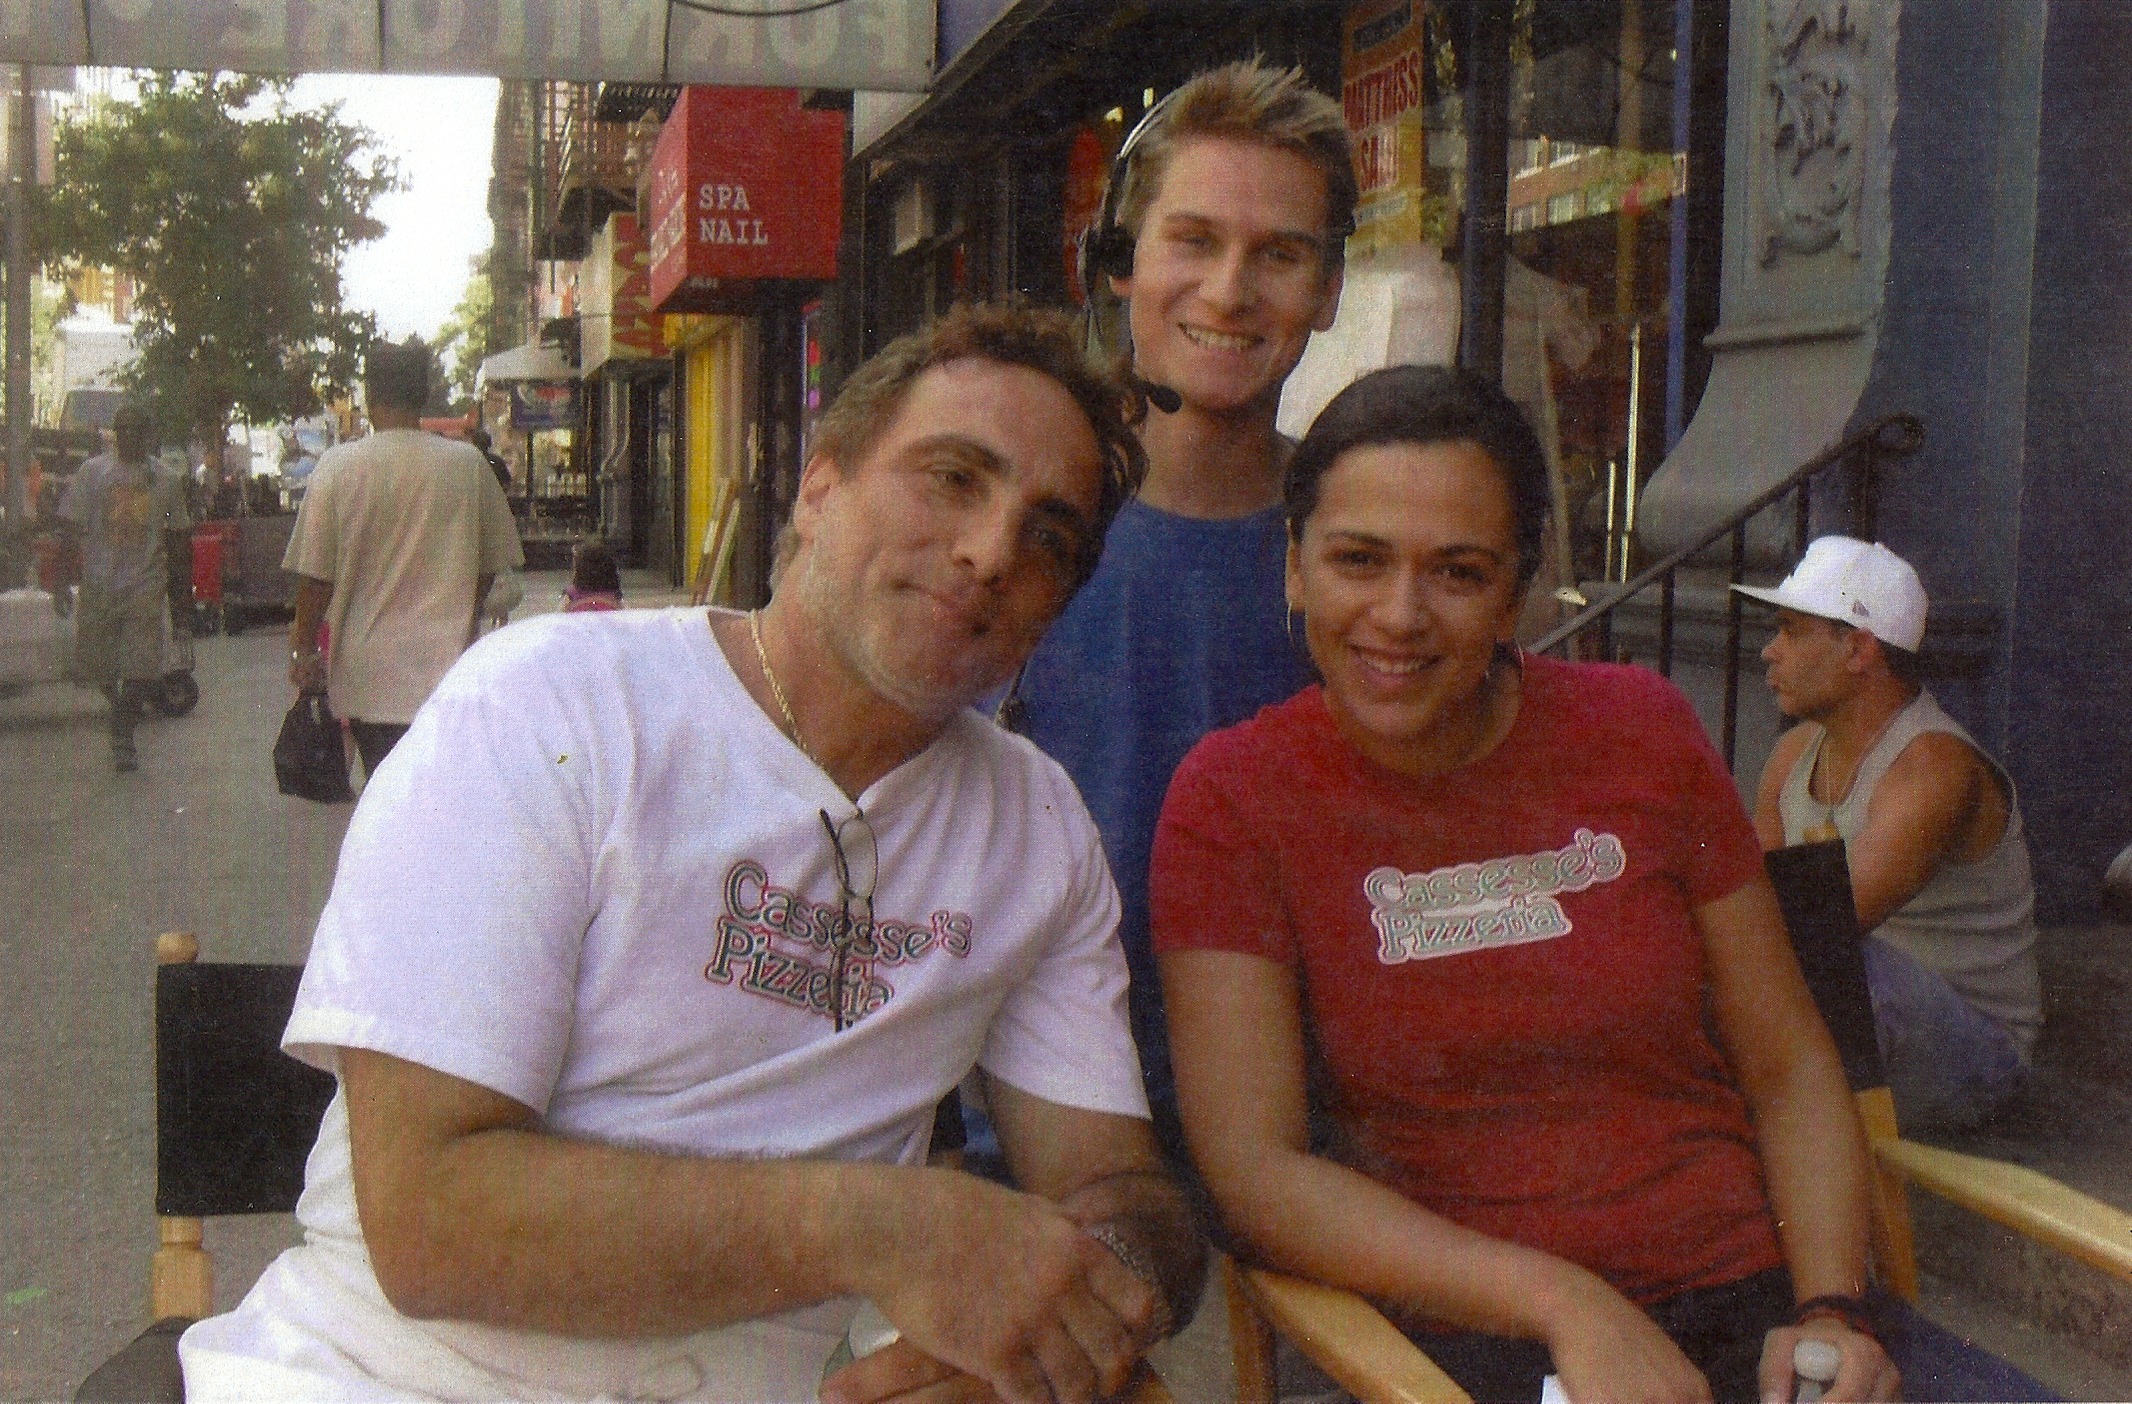 Actors Richard D'Alessandro as Gino Cassesse and Isidra Vego as Gina Cassesse sitting in between takes on he set of Law and Order (SVU).